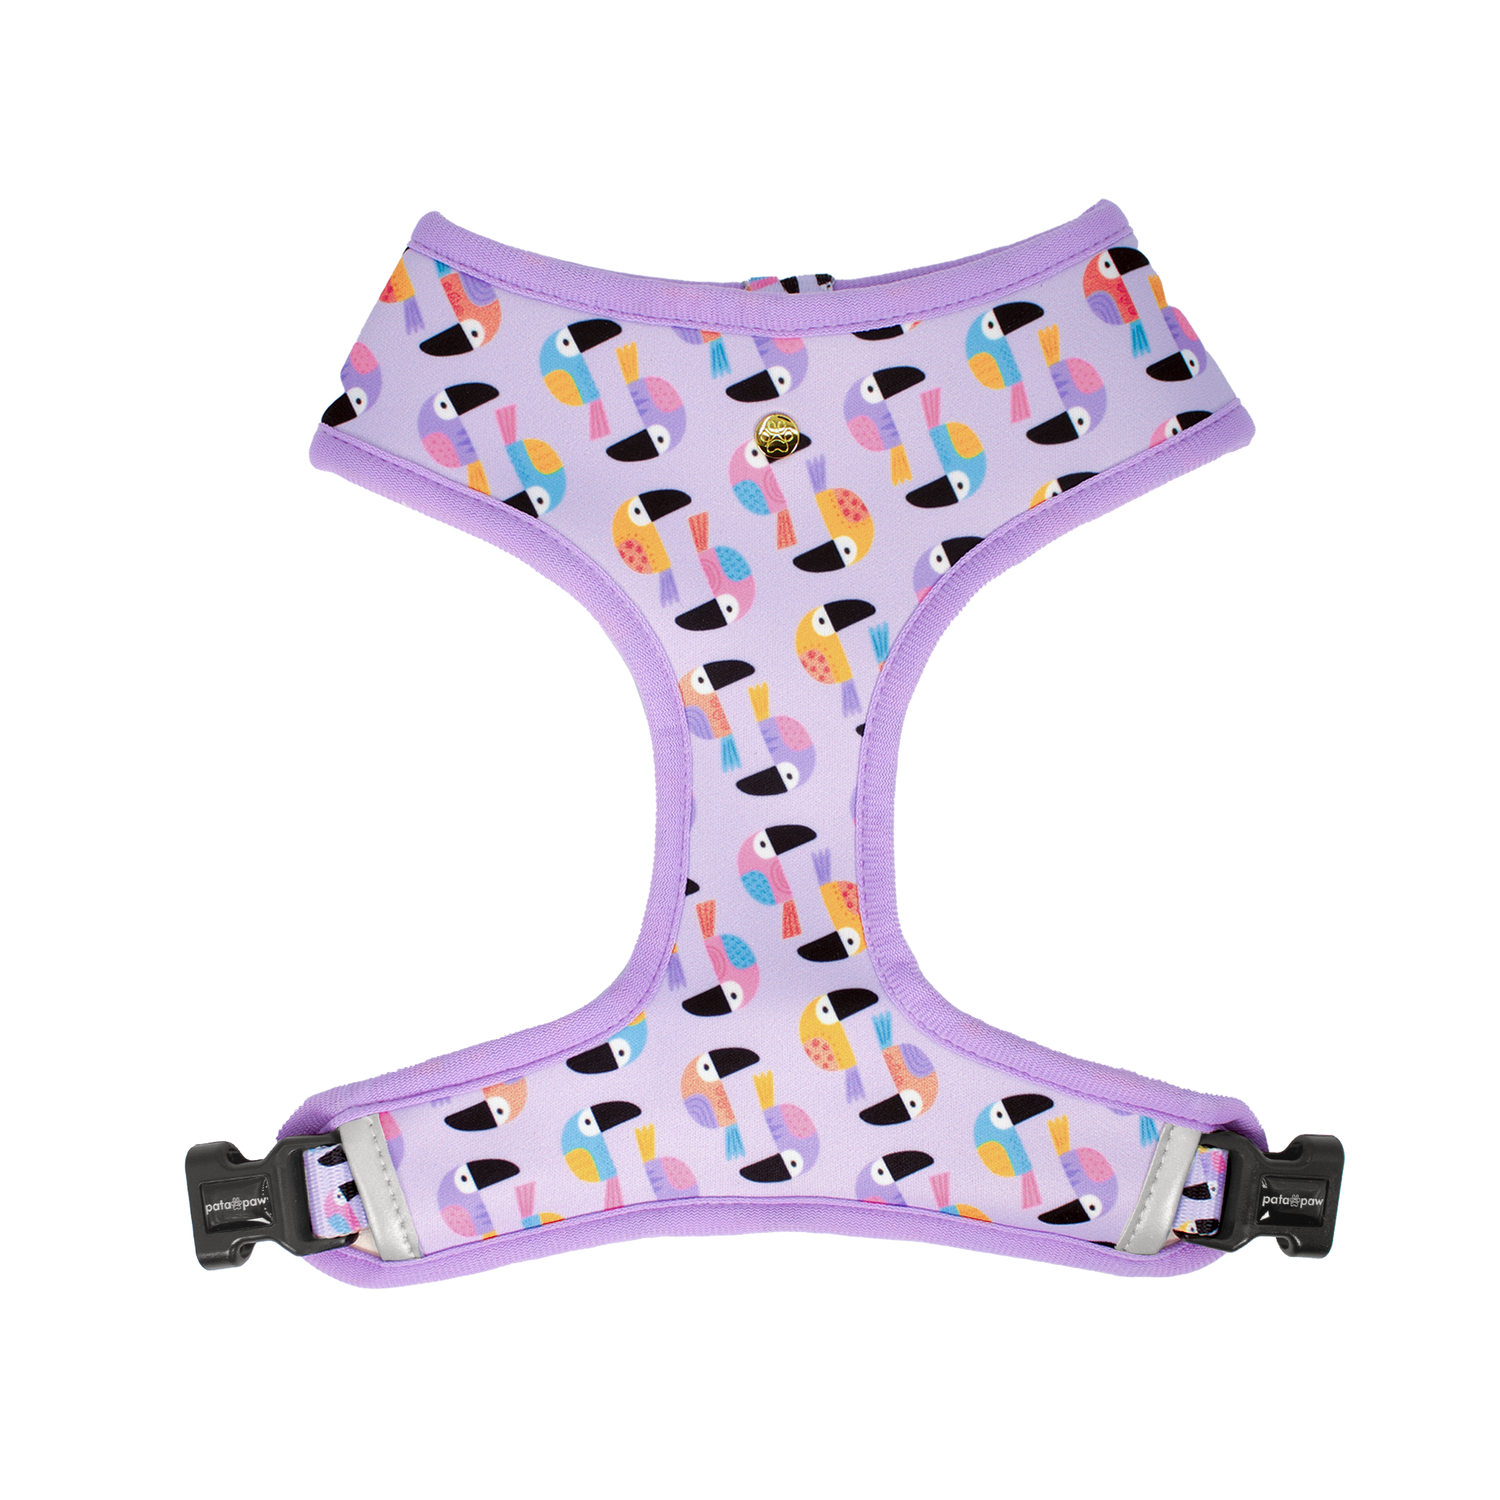 Pata Paw toucan tropics reversible harness showing its pattern.